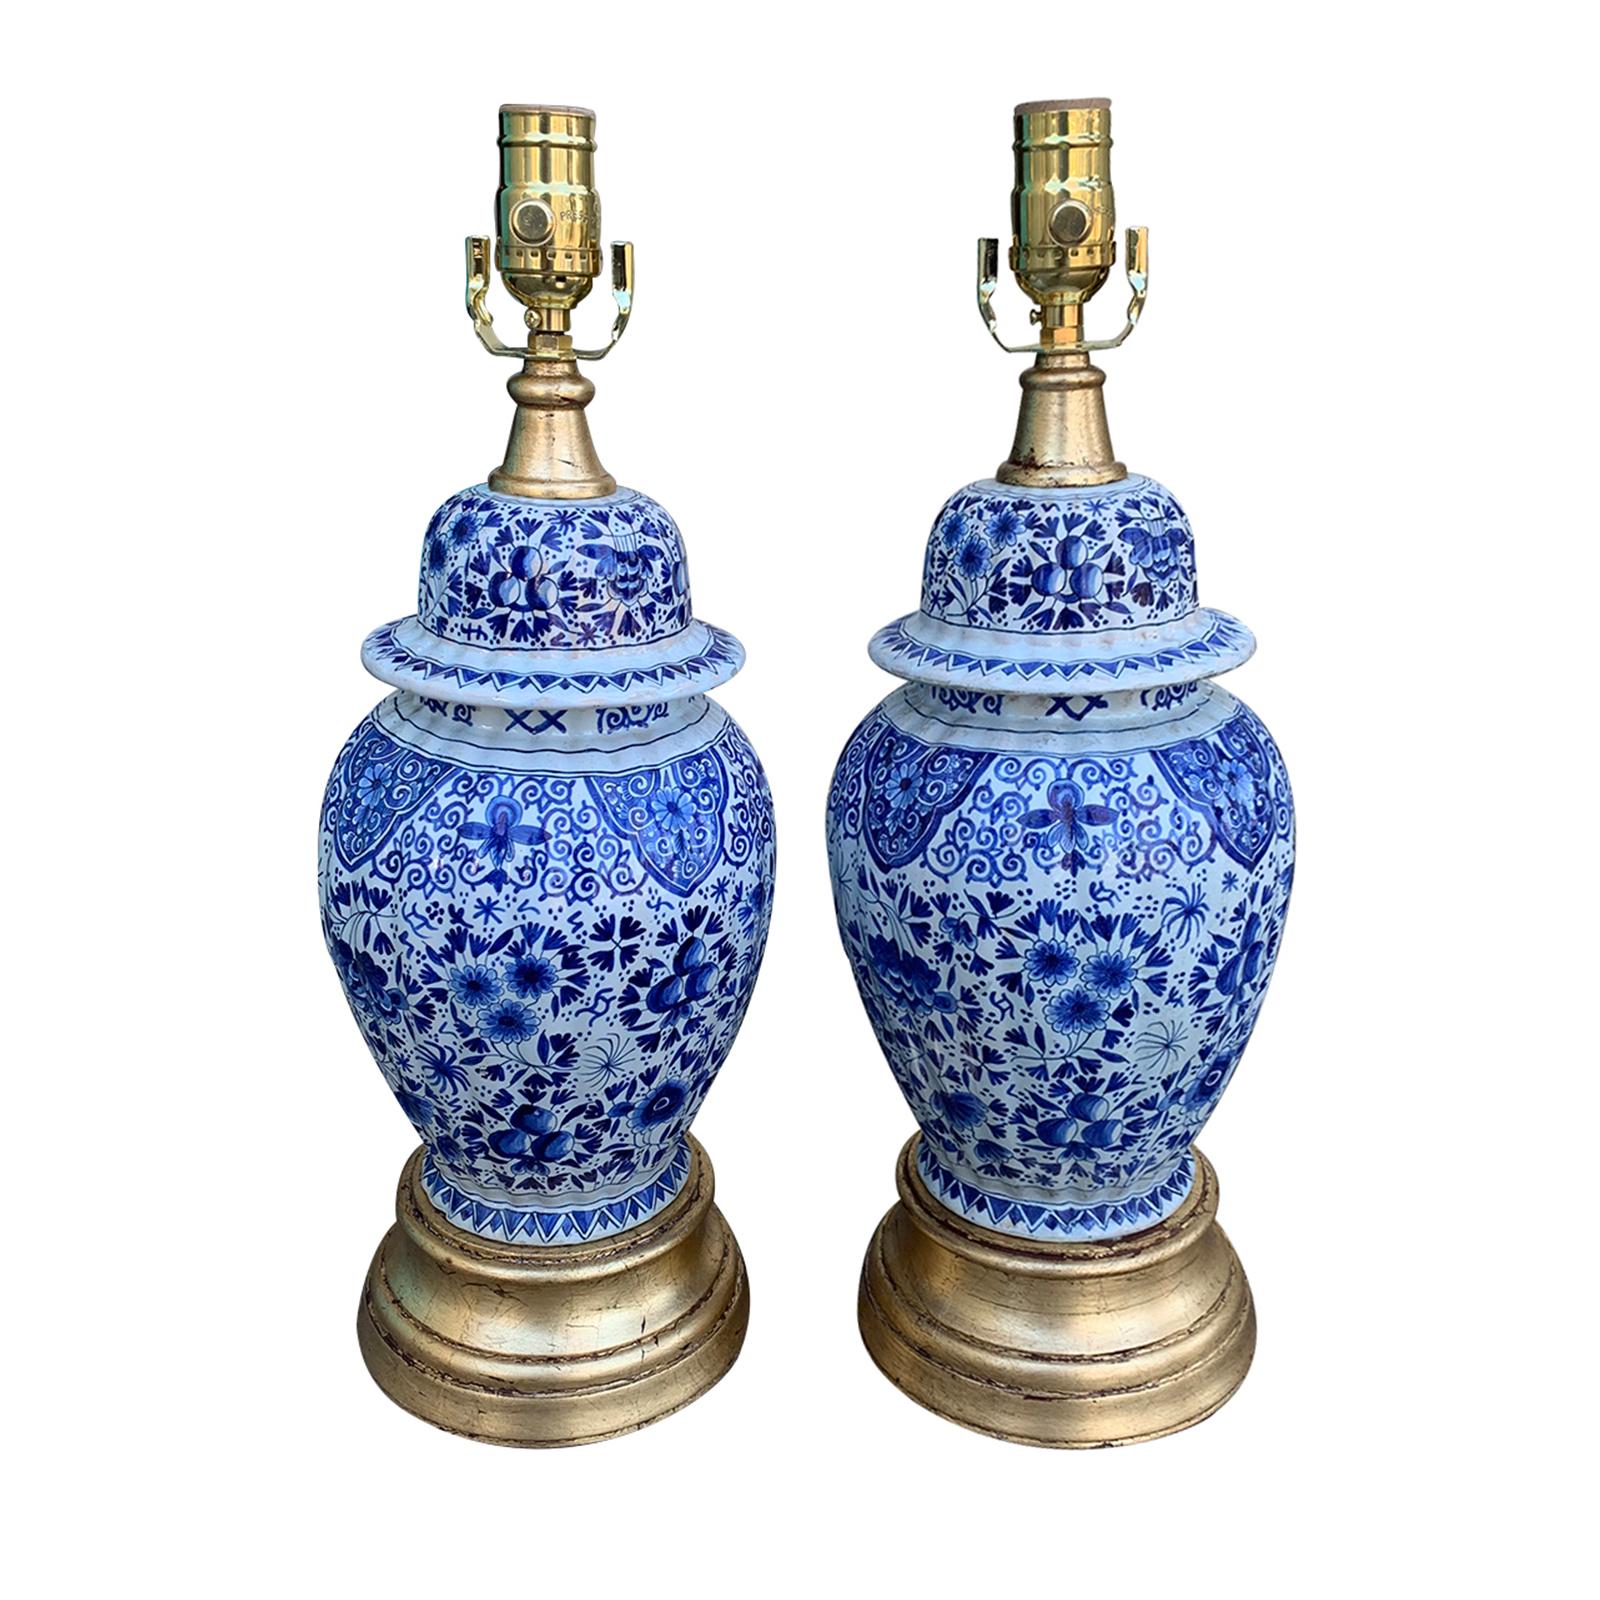 Pair of 19th Century Dutch Delft Blue and White Lamps, Gilded Bases